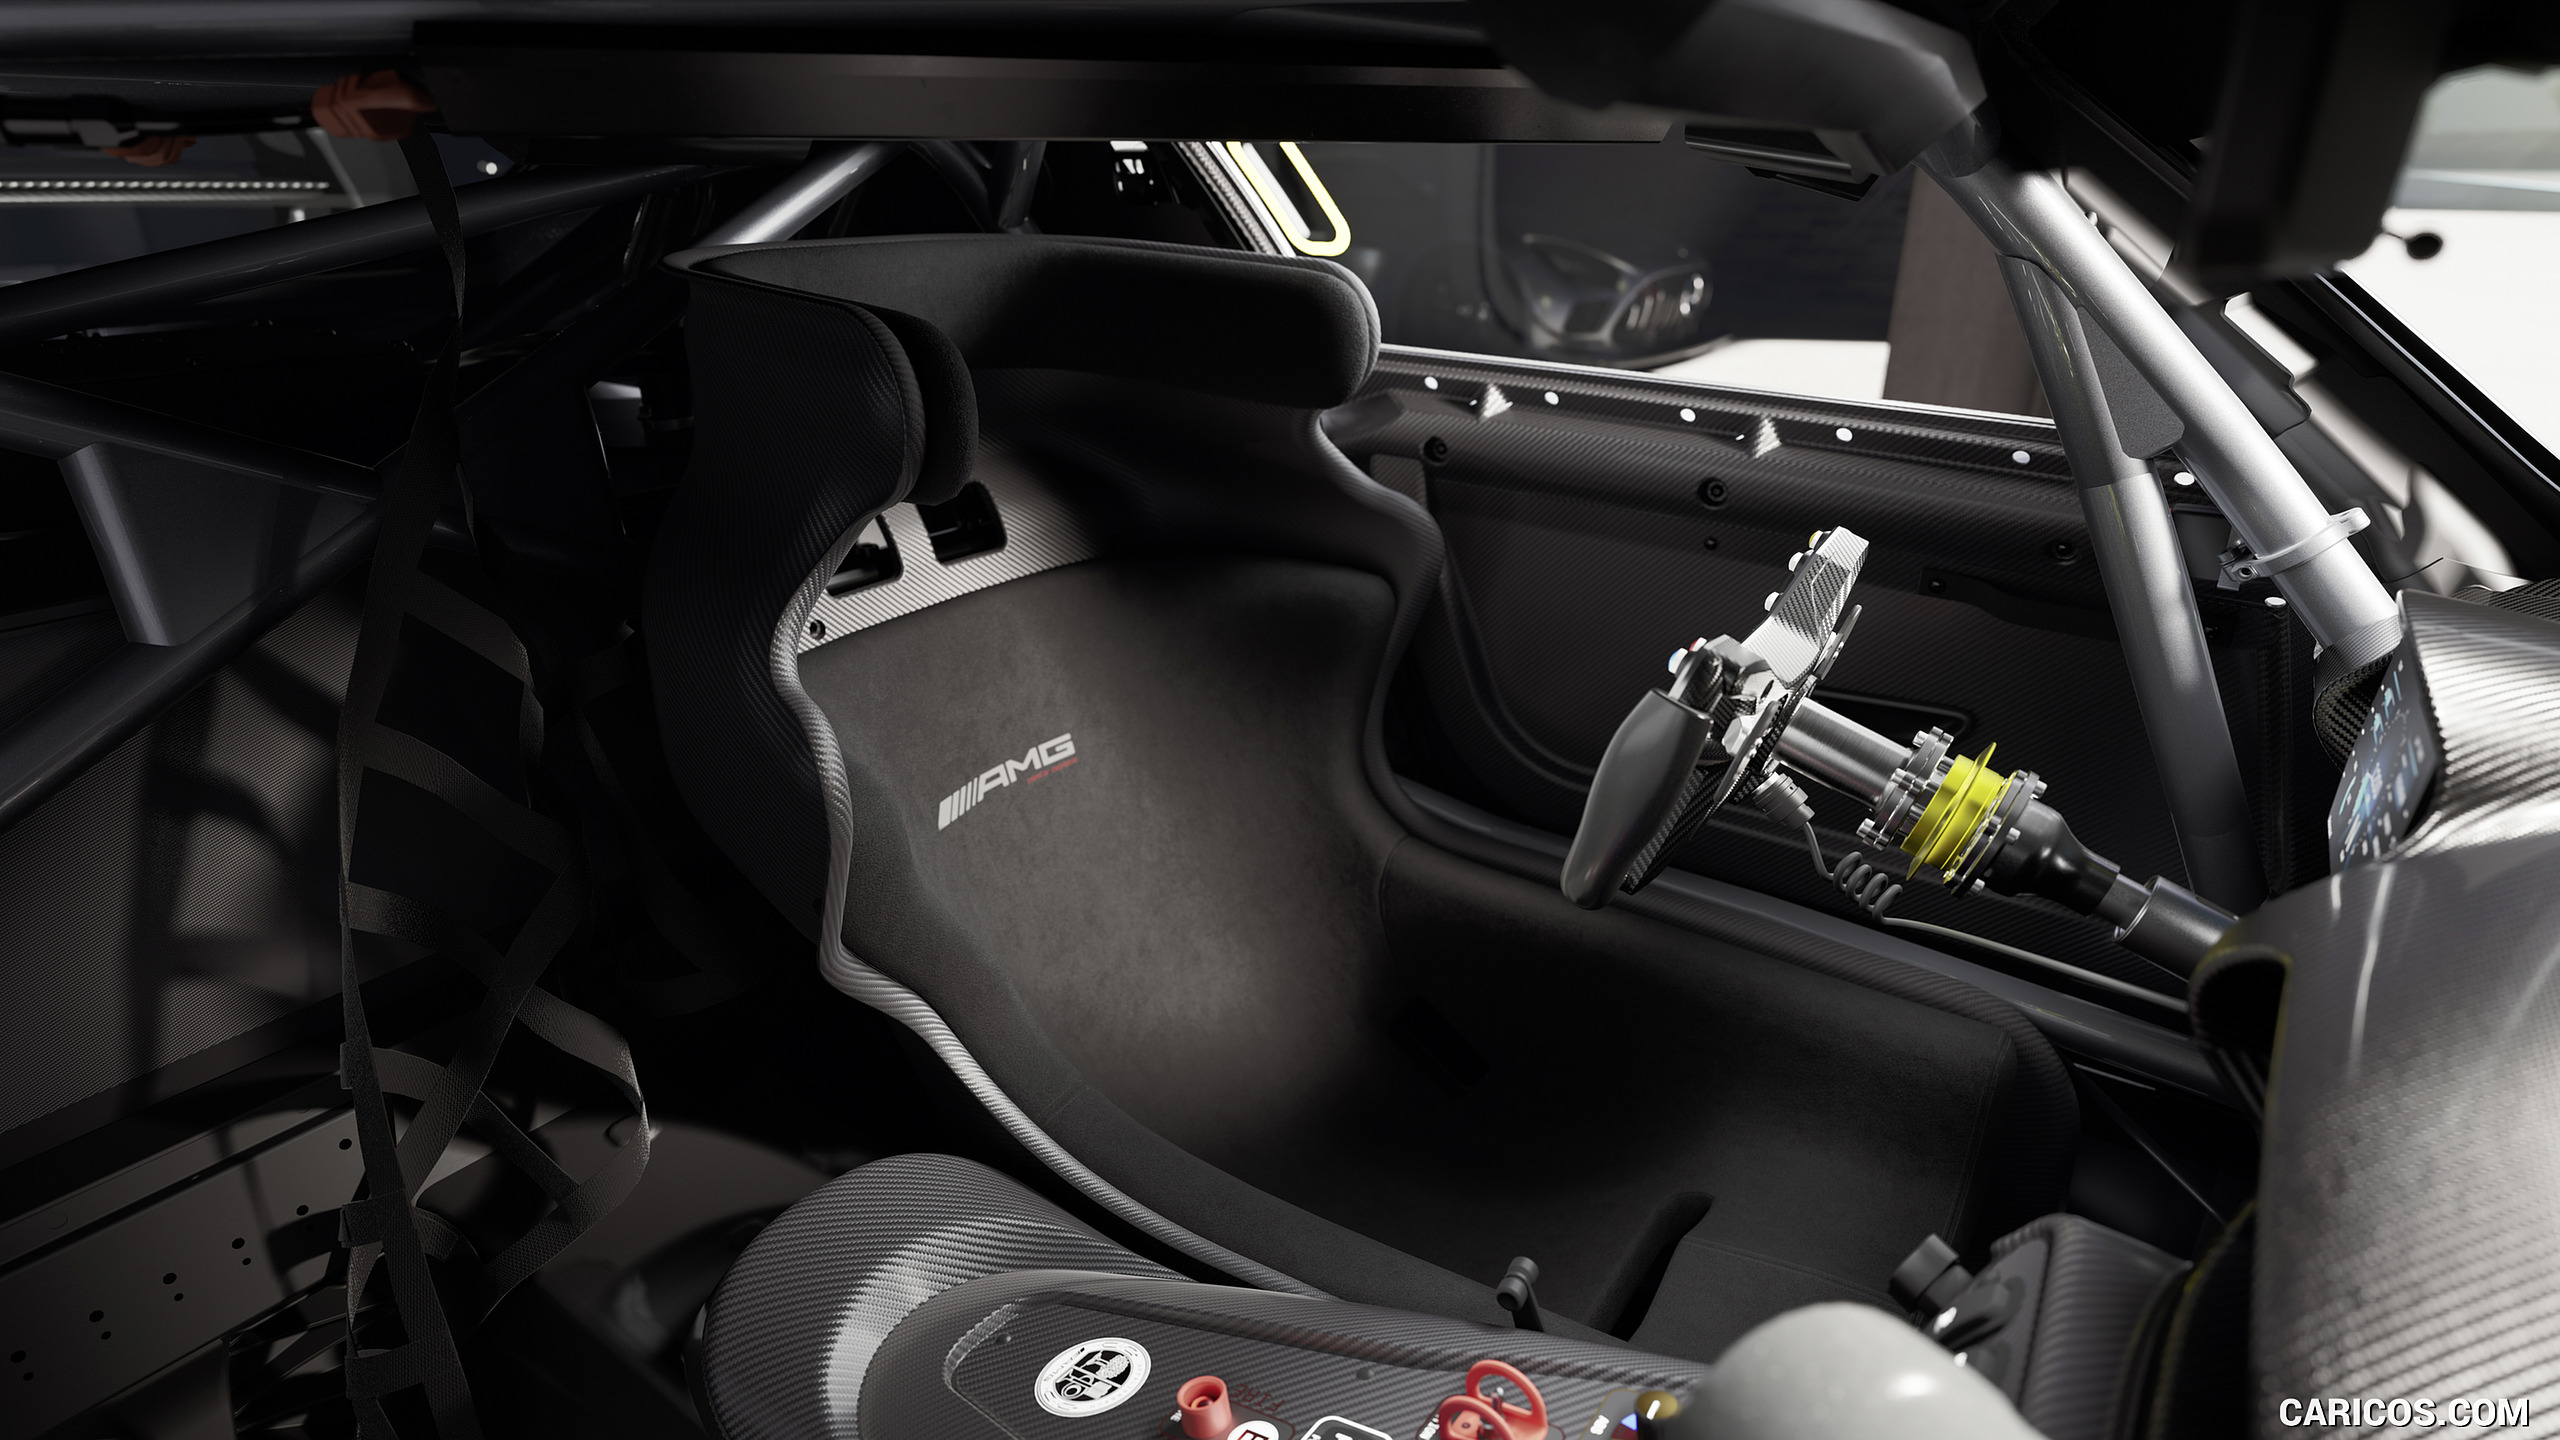 2023 Mercedes-AMG GT Track Series - Interior, Seats, #17 of 17